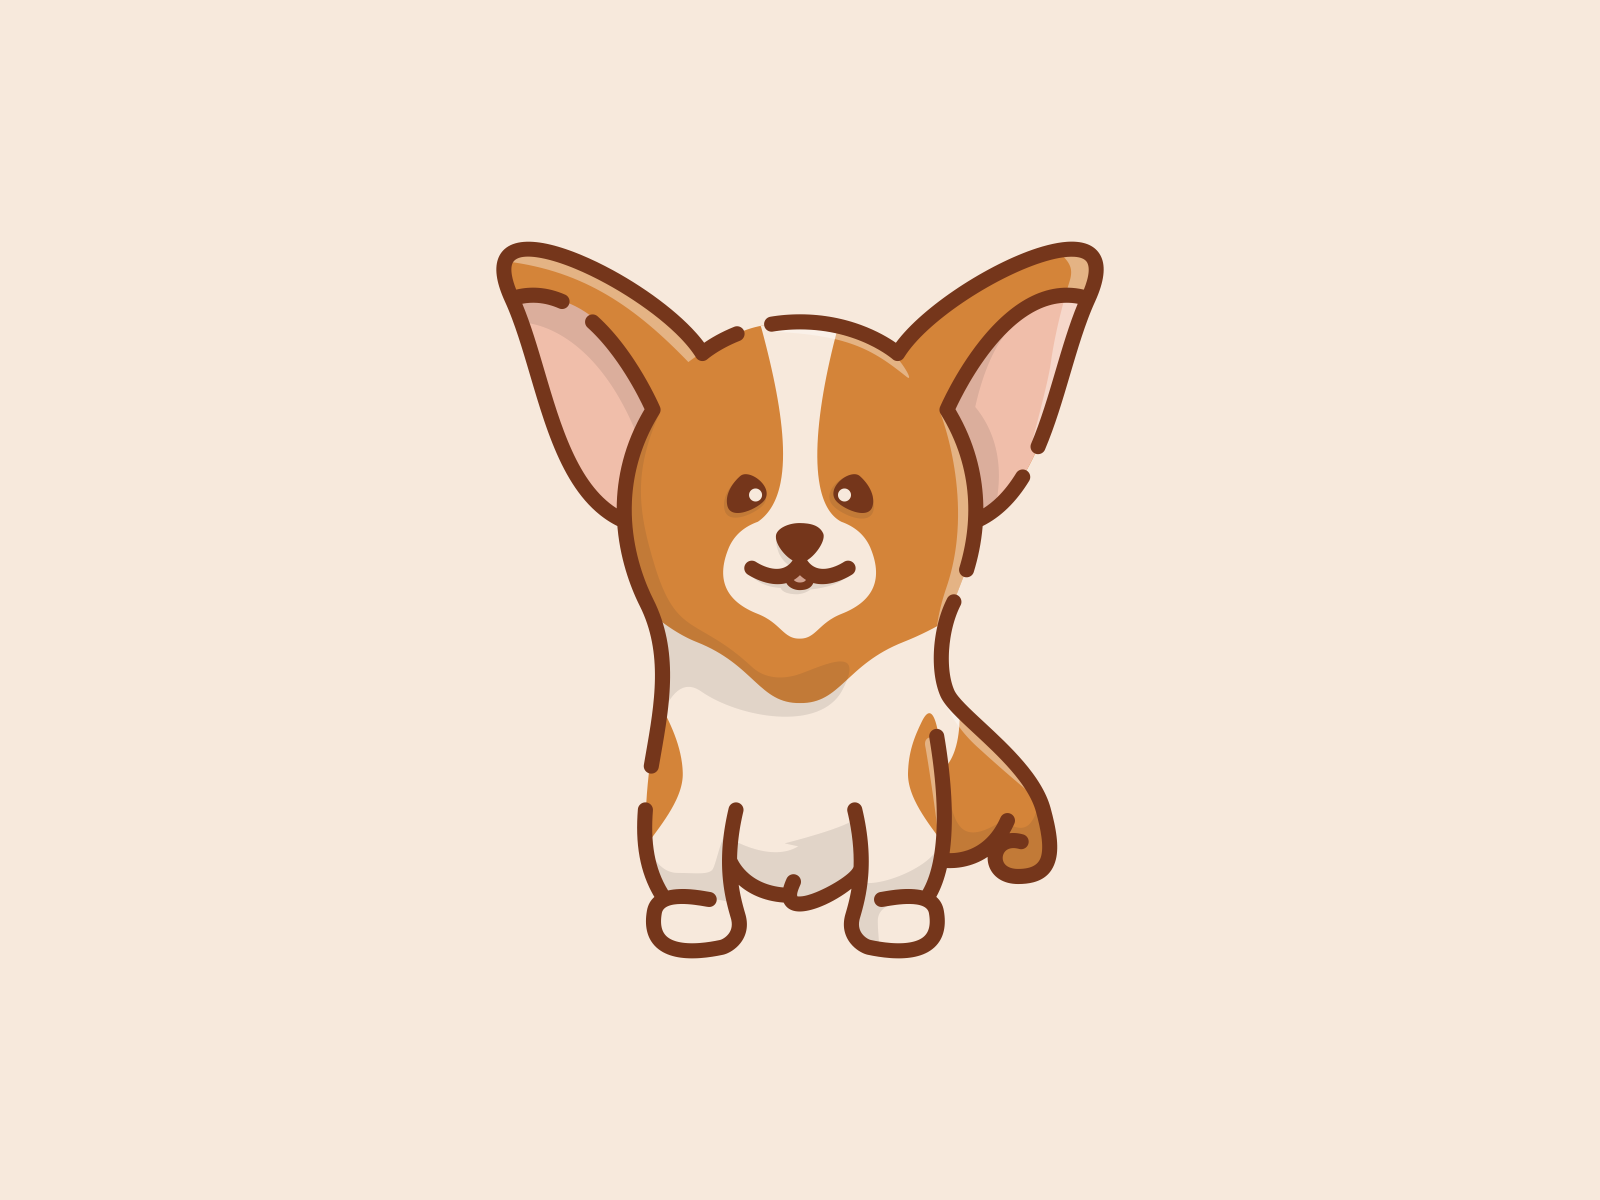 Cute Dog by Ard on Dribbble